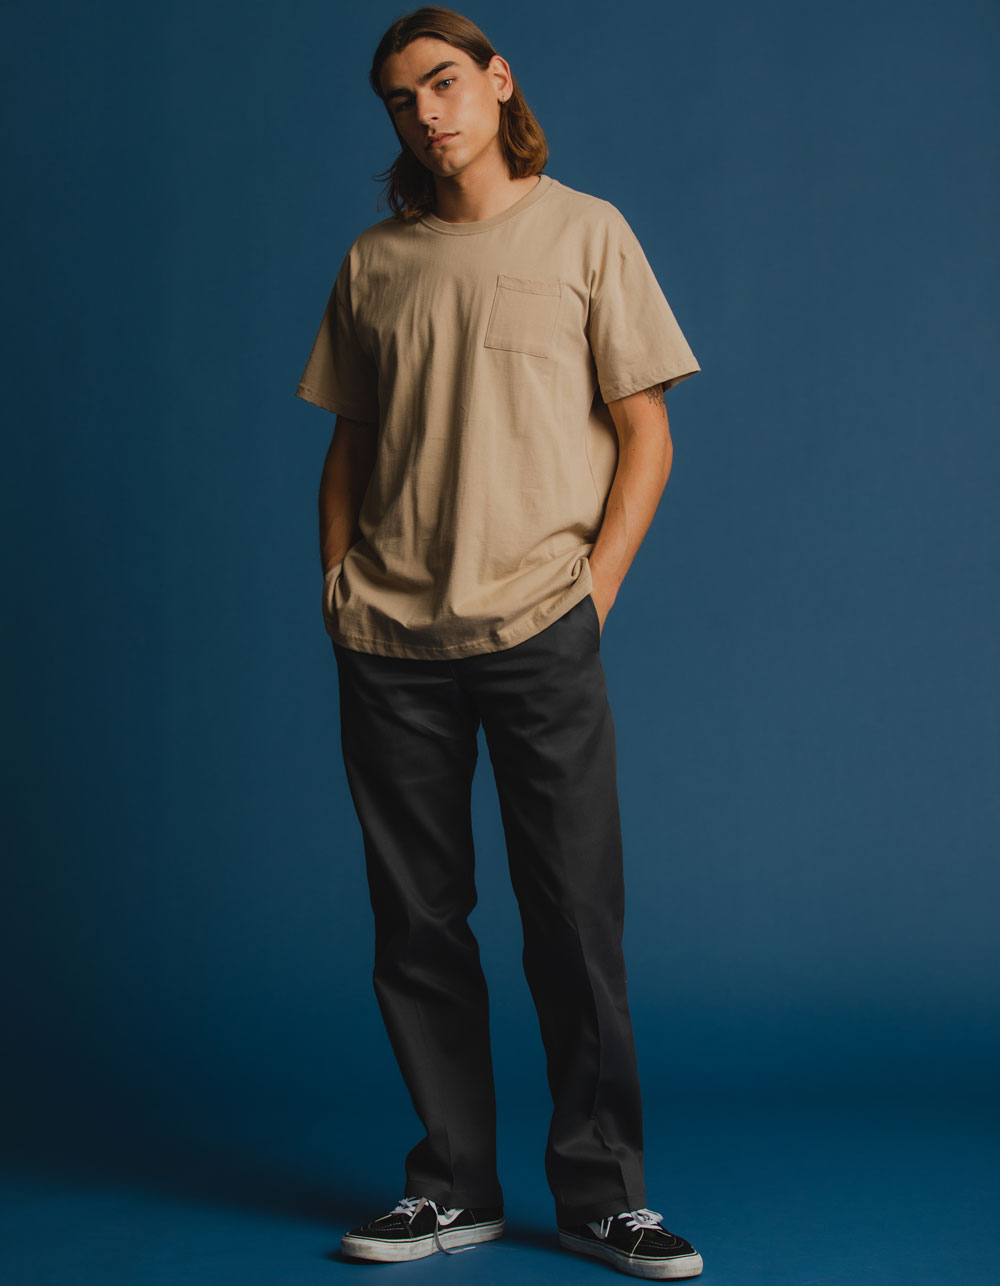 How to style Dickies 874